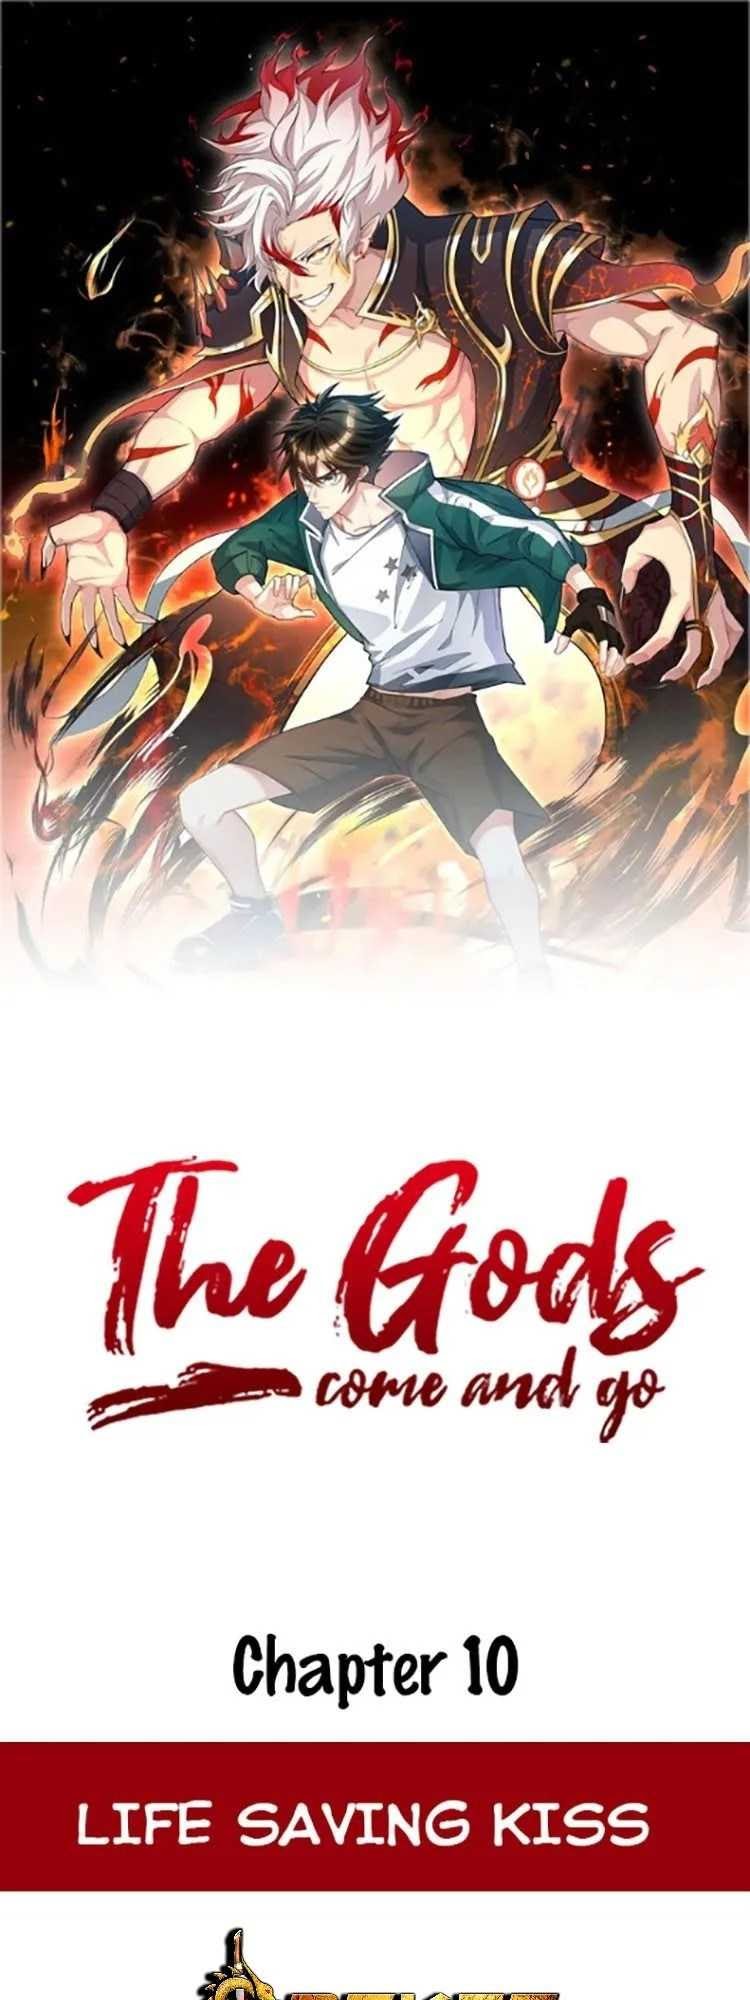 The Gods, Comes and Go Chapter 10